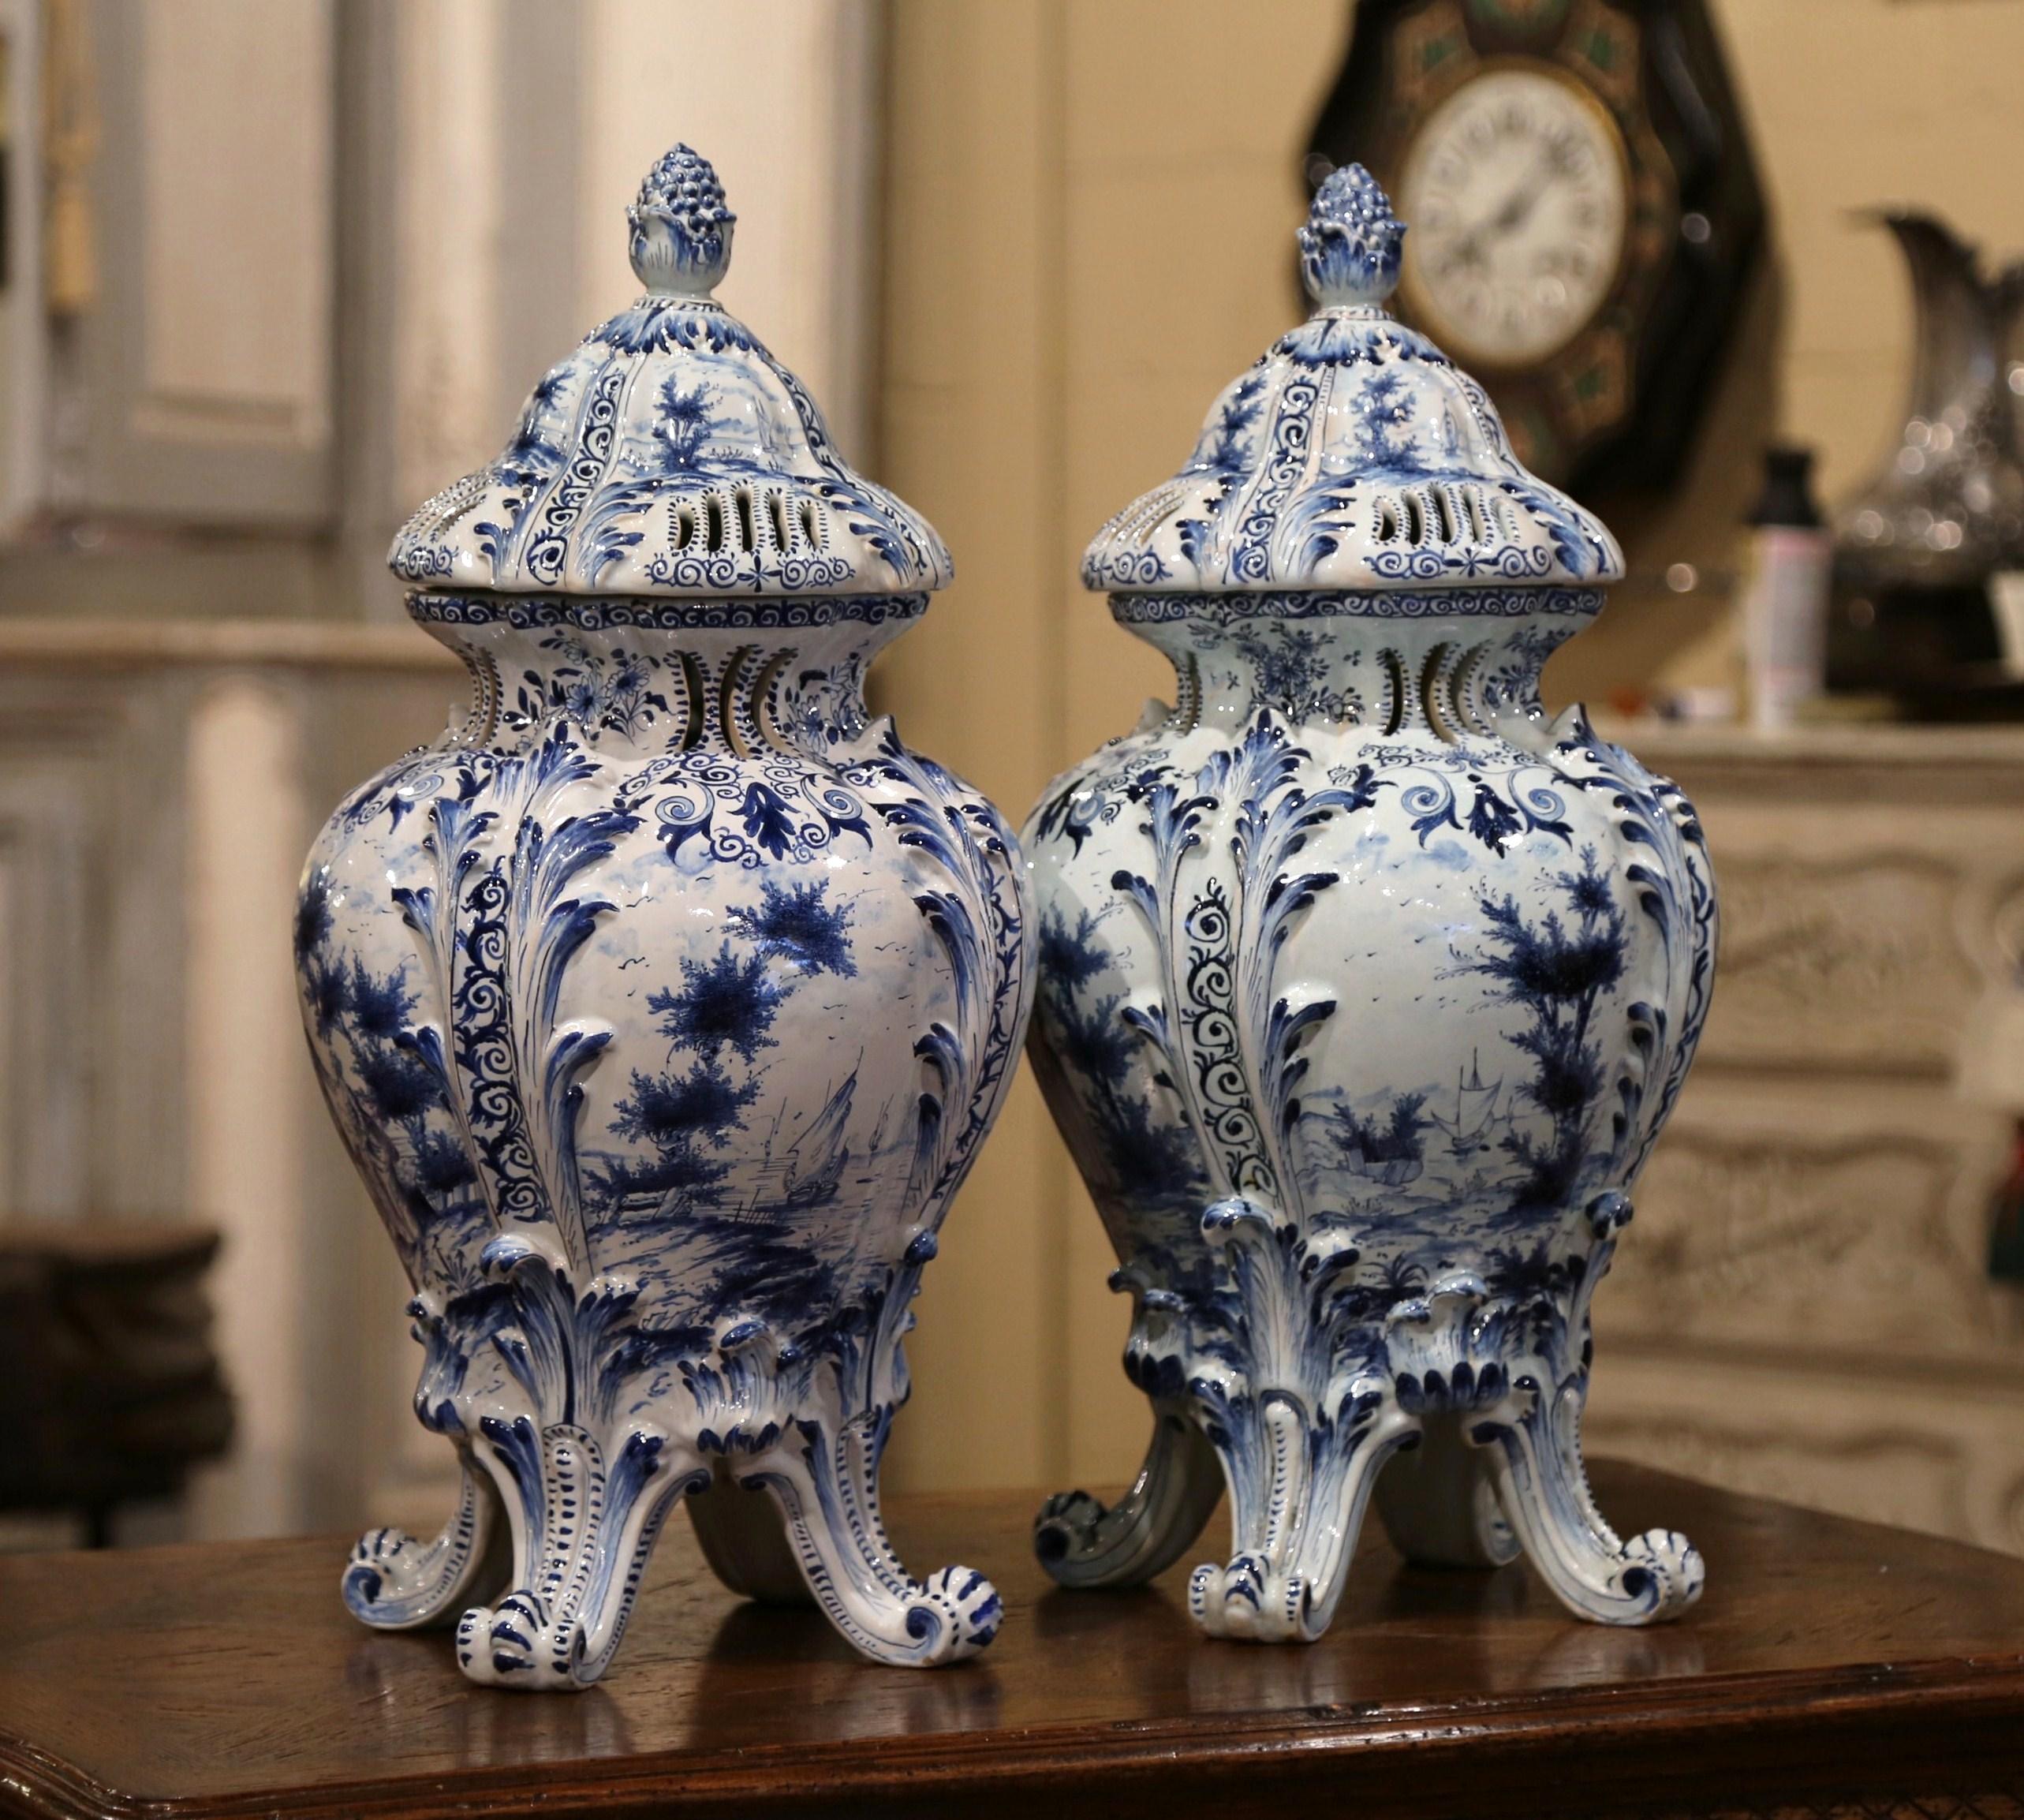 These important antique vases in the Louis XV style were crafted in France, circa 1780. Raised on scrolling feet decorated with acanthus leaves on the shoulders, the elegant tureens are round in shape with a pierced neck, each large vessel features